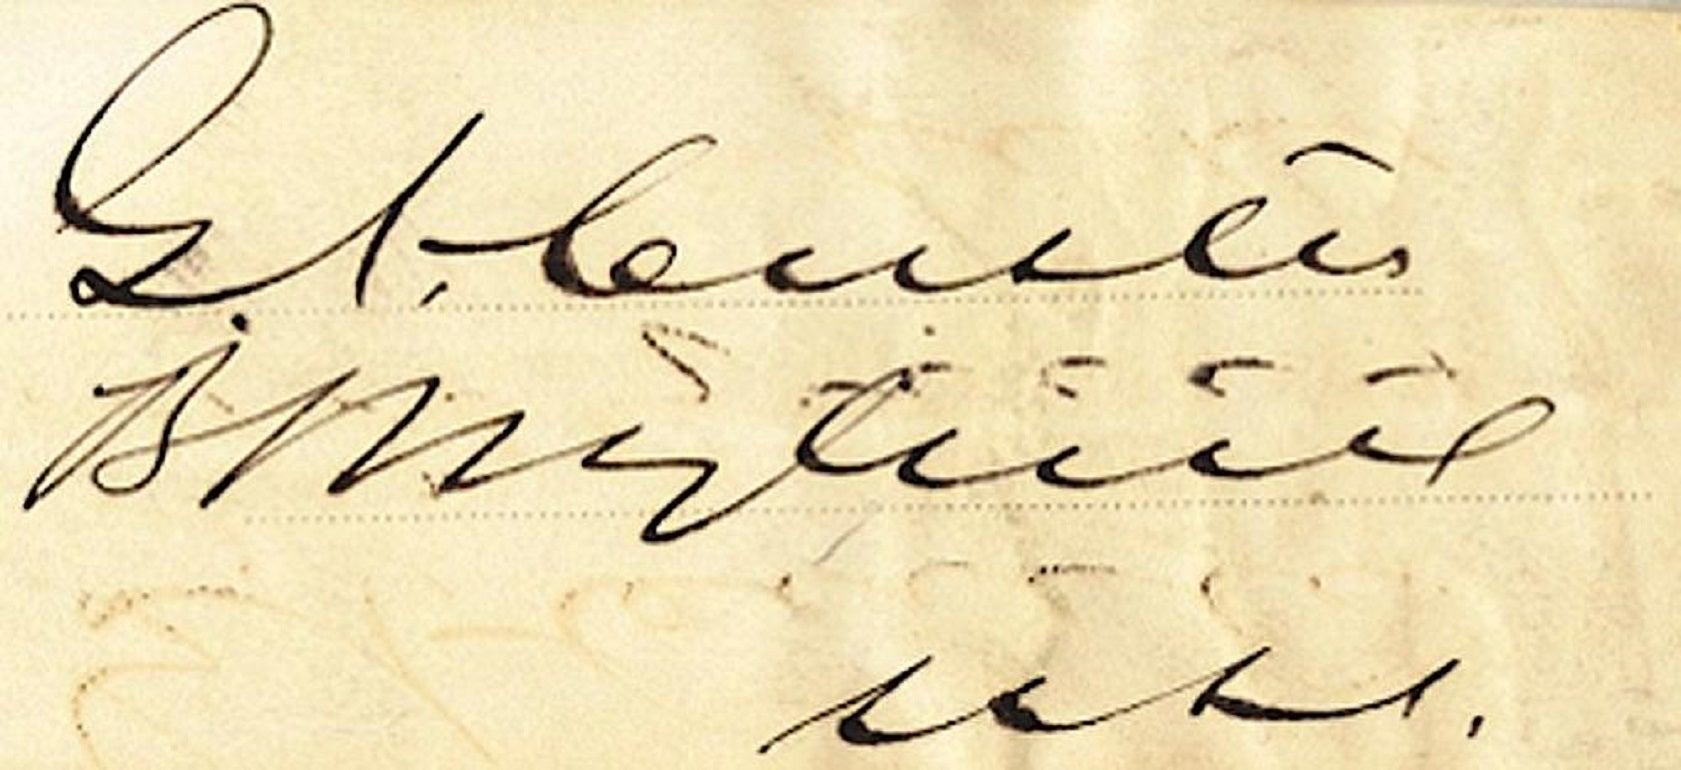 A superb historic signature from General George Custer

George Armstrong Custer (1839-1876) was a United States Army officer and cavalry commander in the American Civil War and the Indian Wars.

Today he is most remembered for leading his army